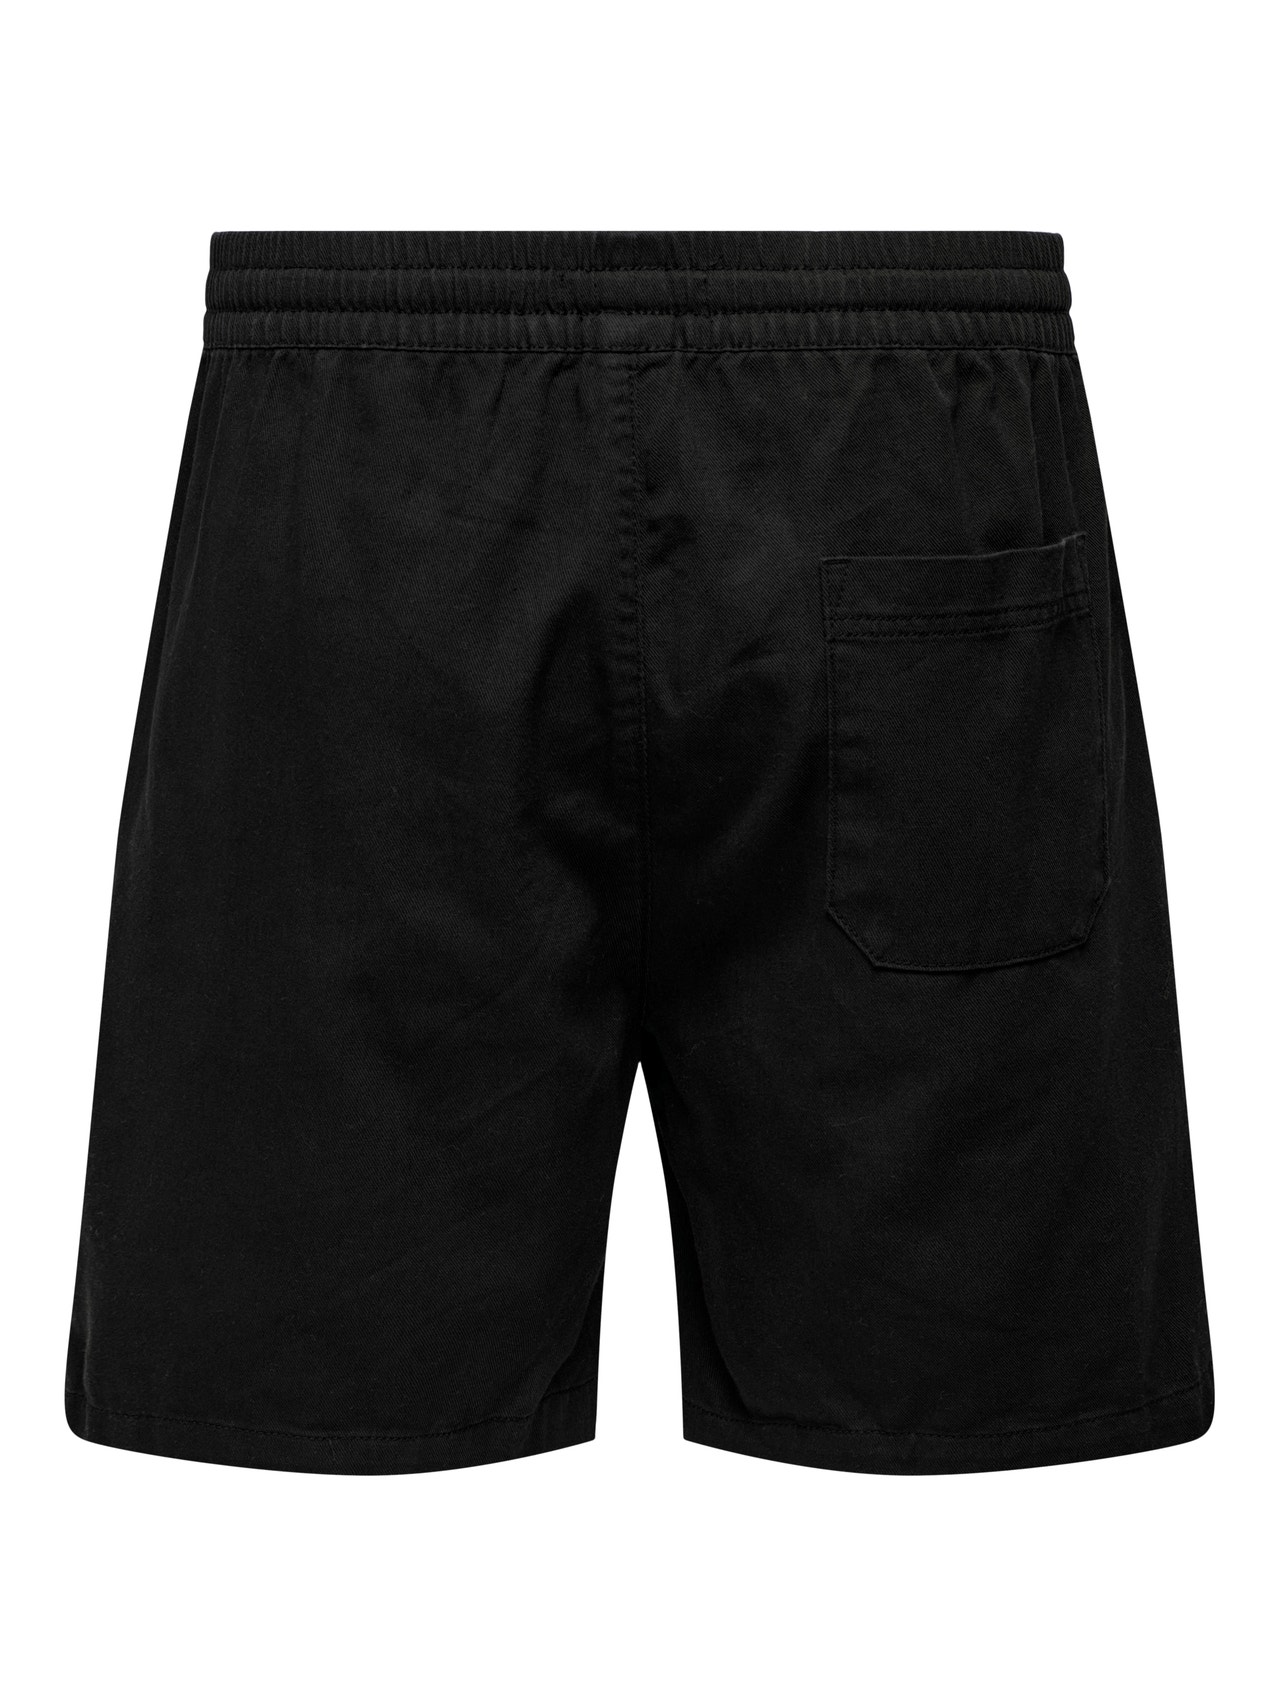 ONLY & SONS Shorts with mid waist -Black - 22025790